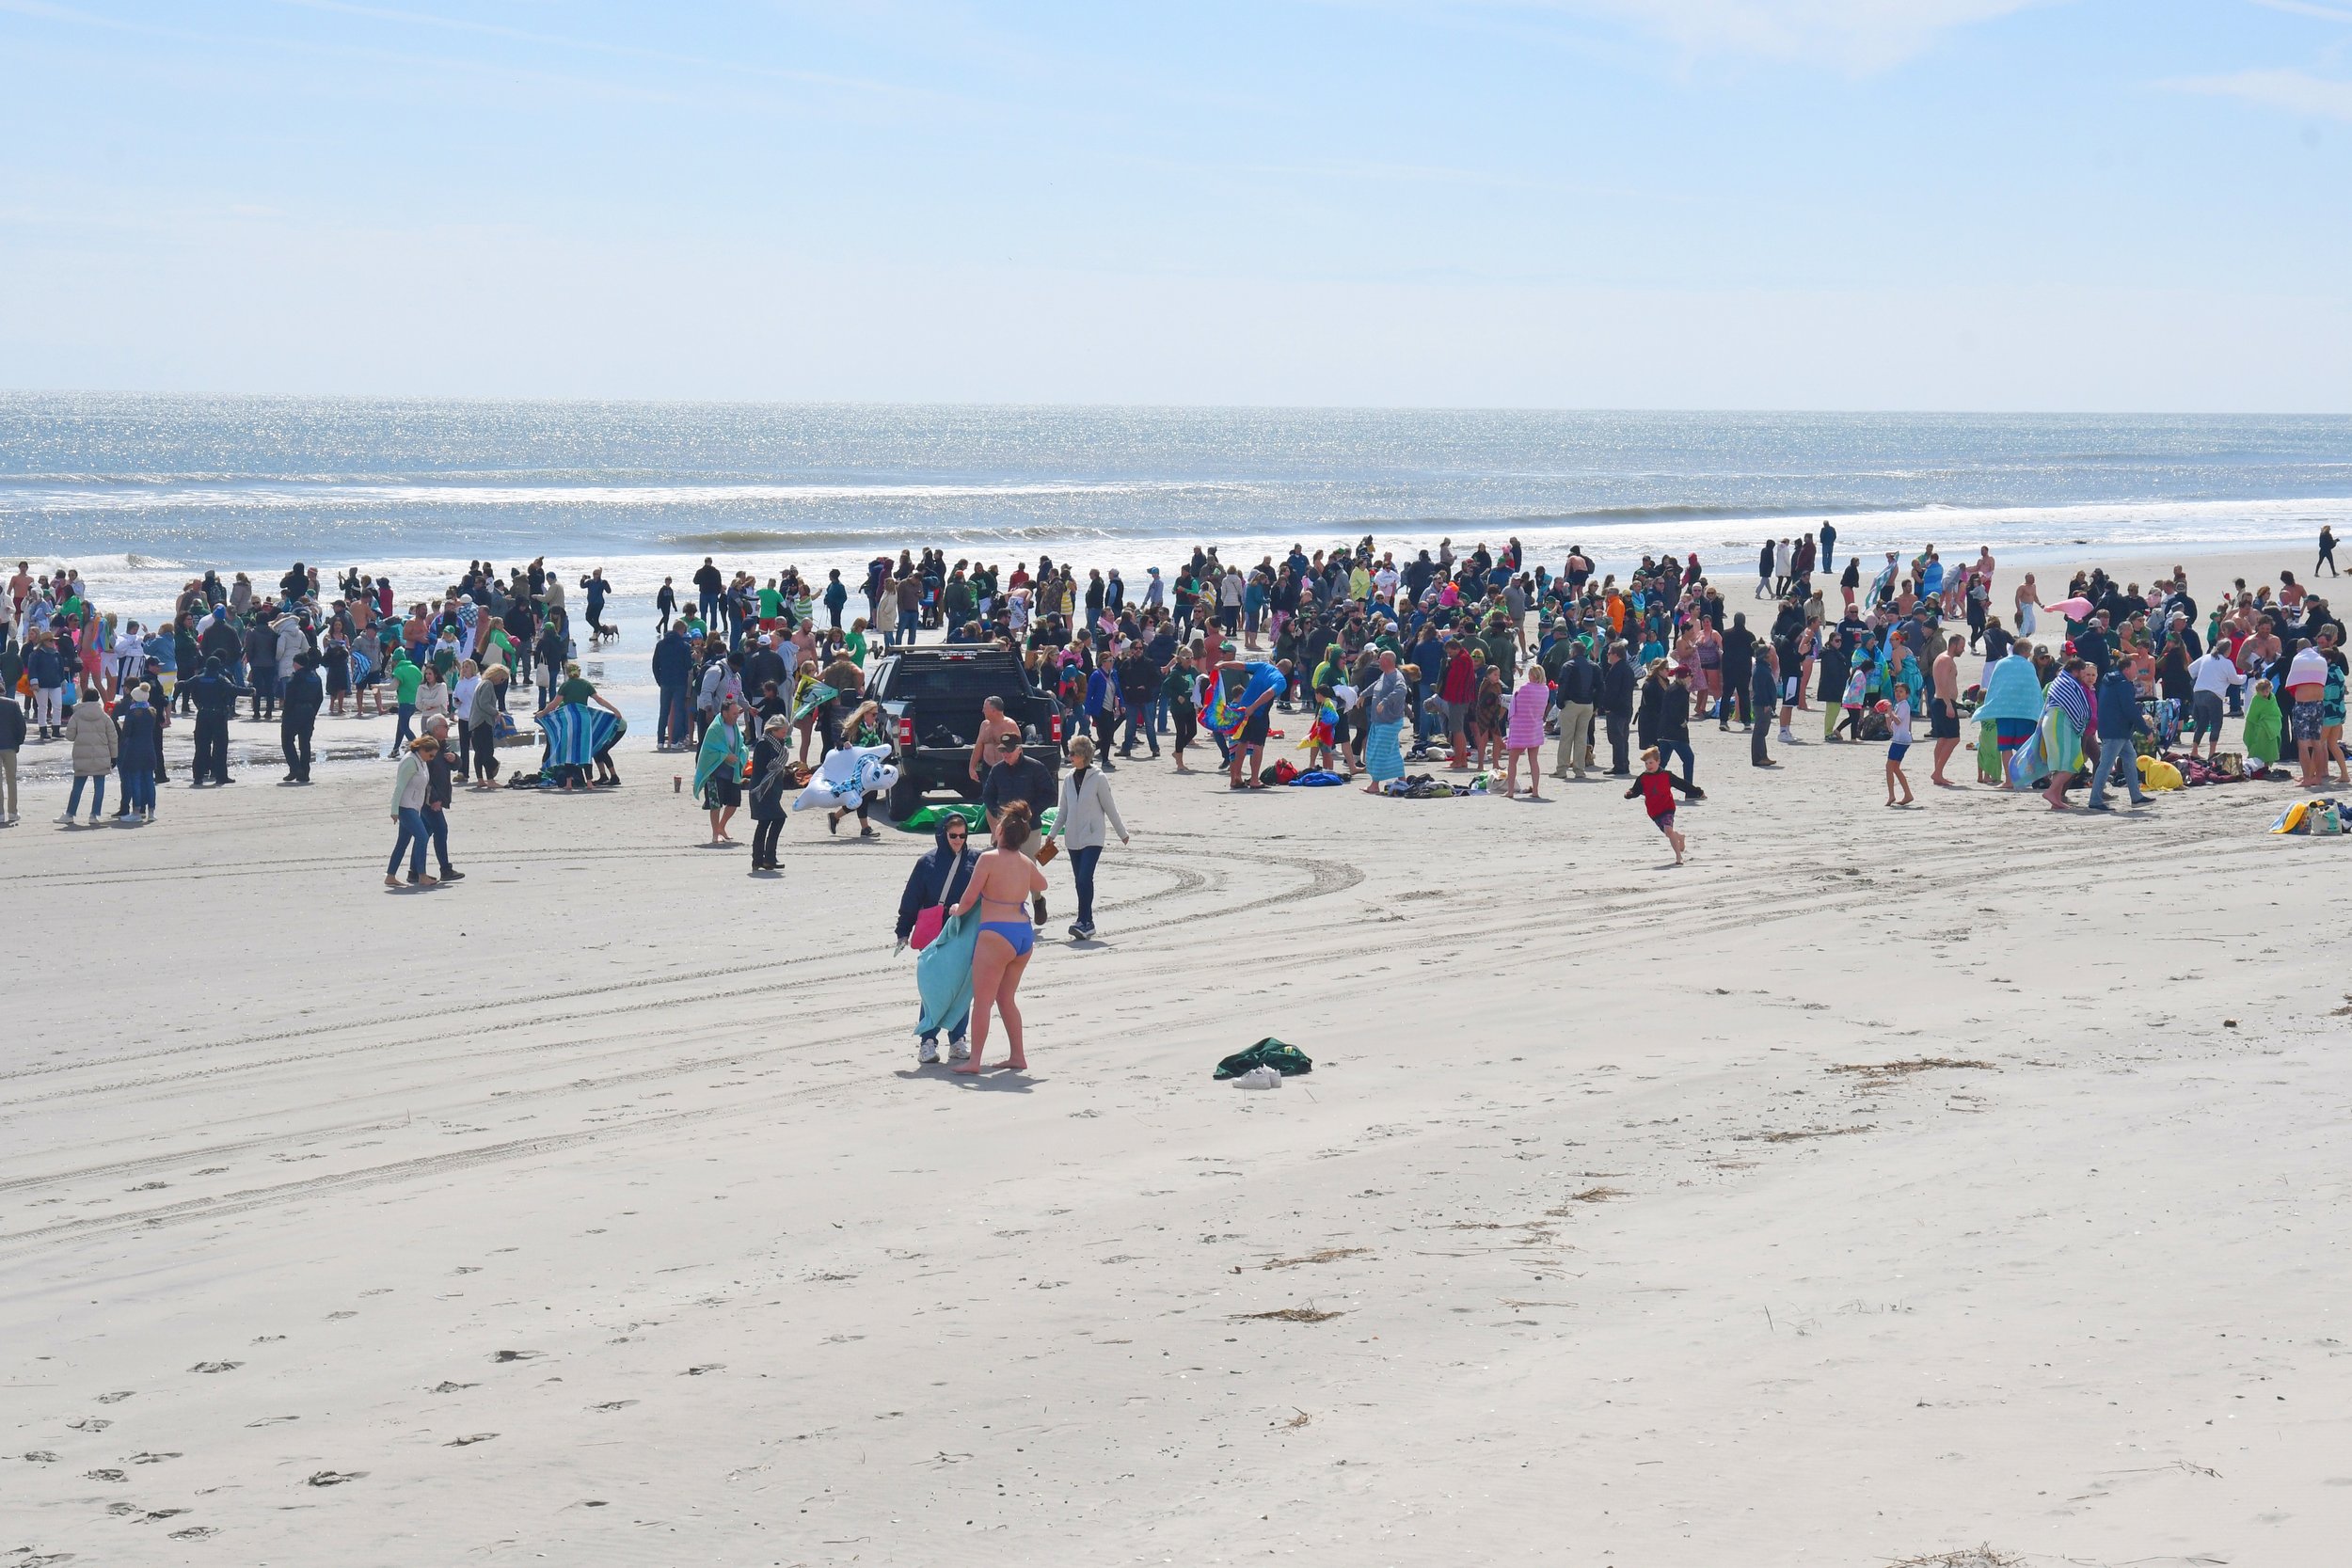 Everyone gathered on the beach at 96th Street just after the Shiver.